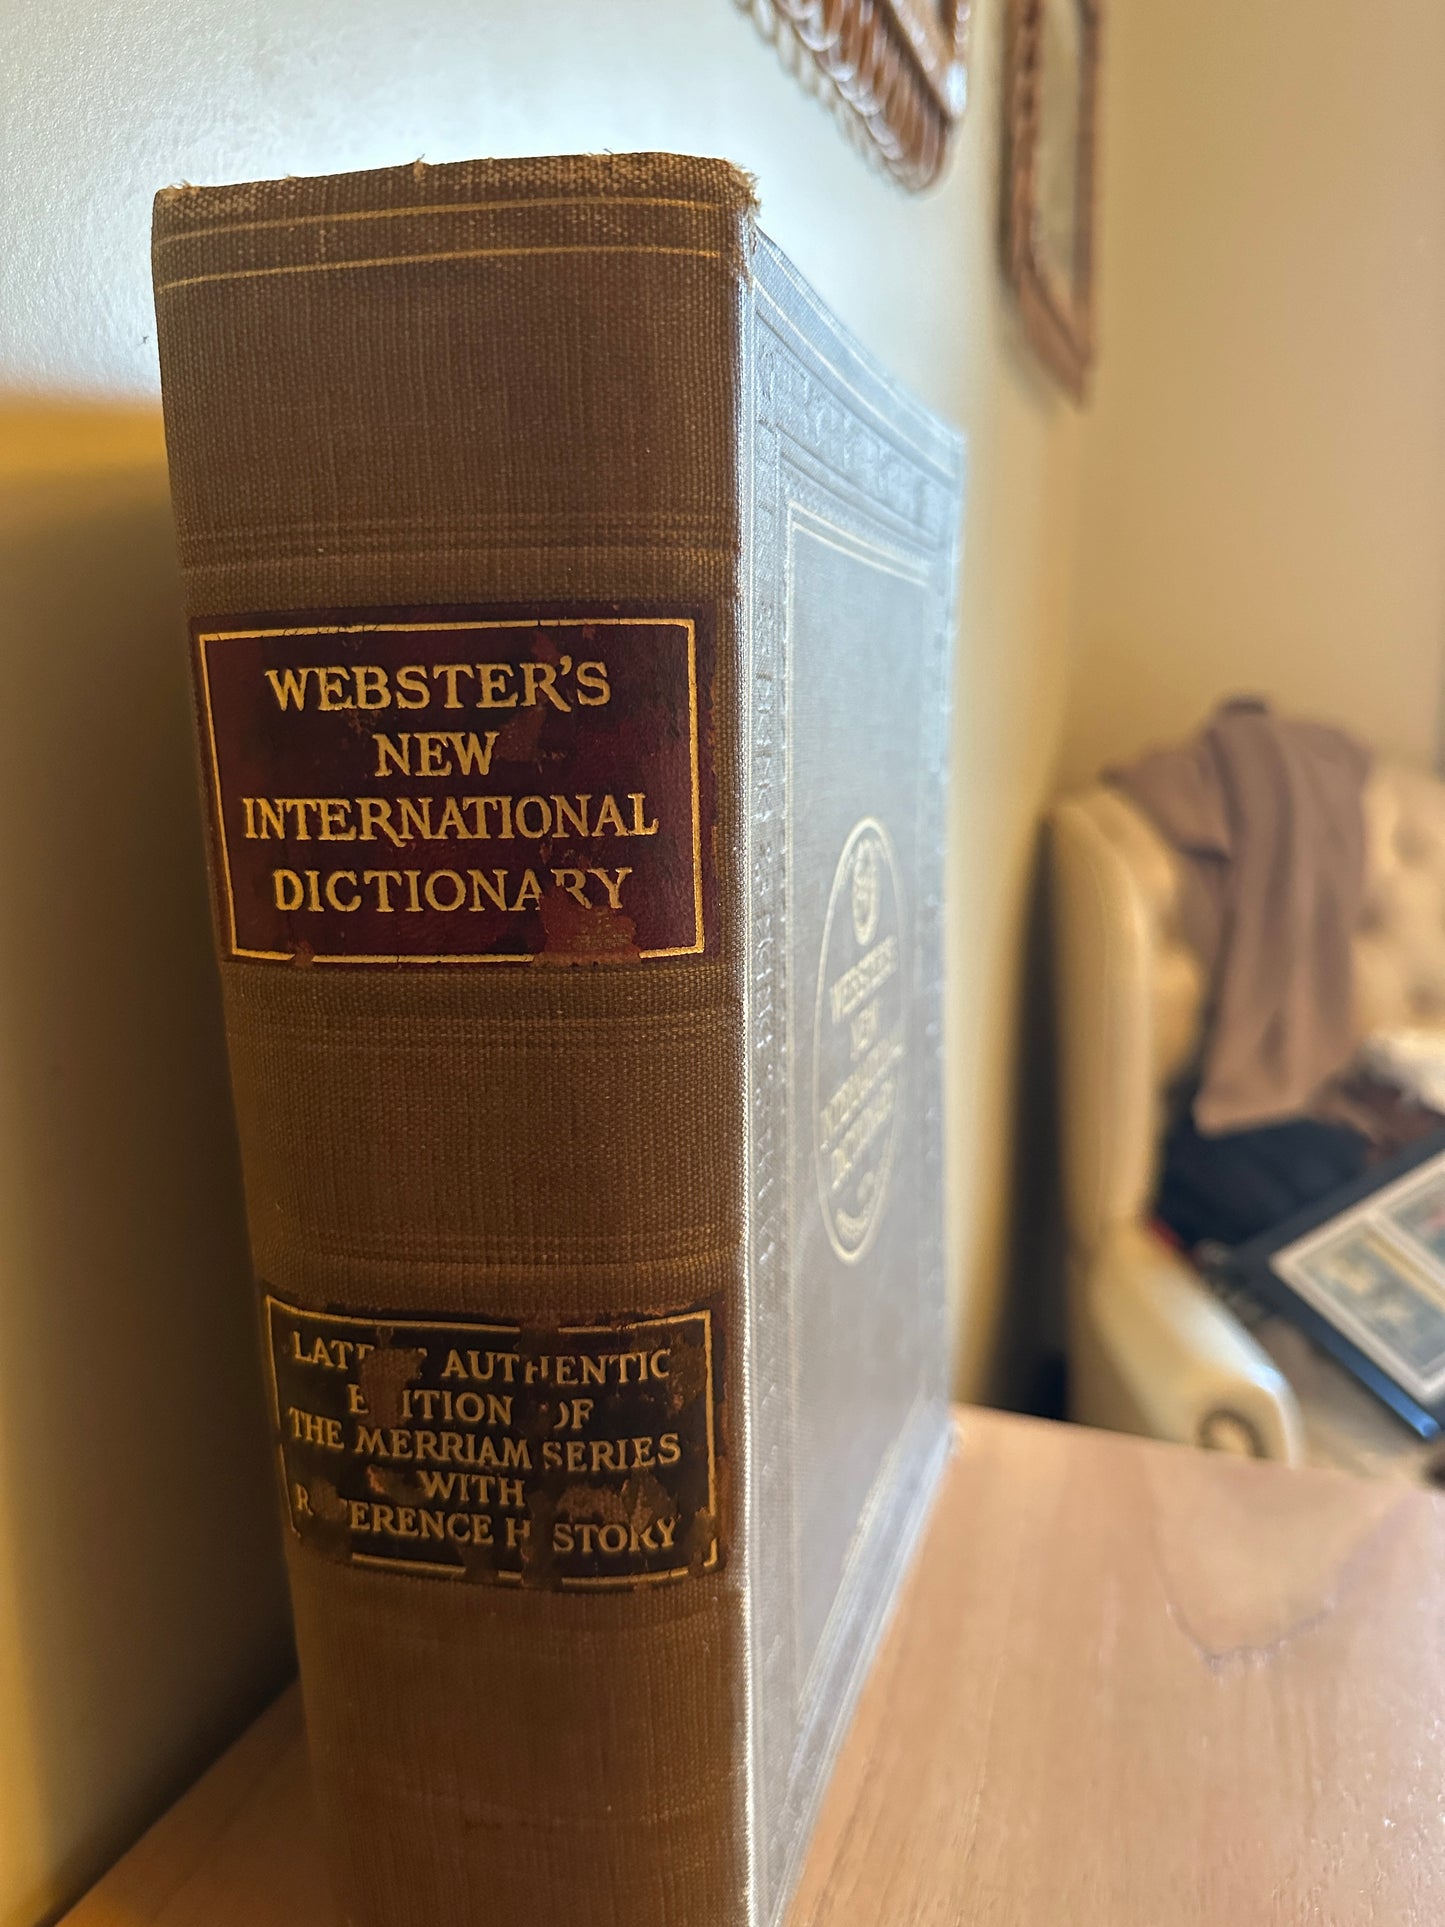 1931 Webster New International Dictionary (India Paper Edition)